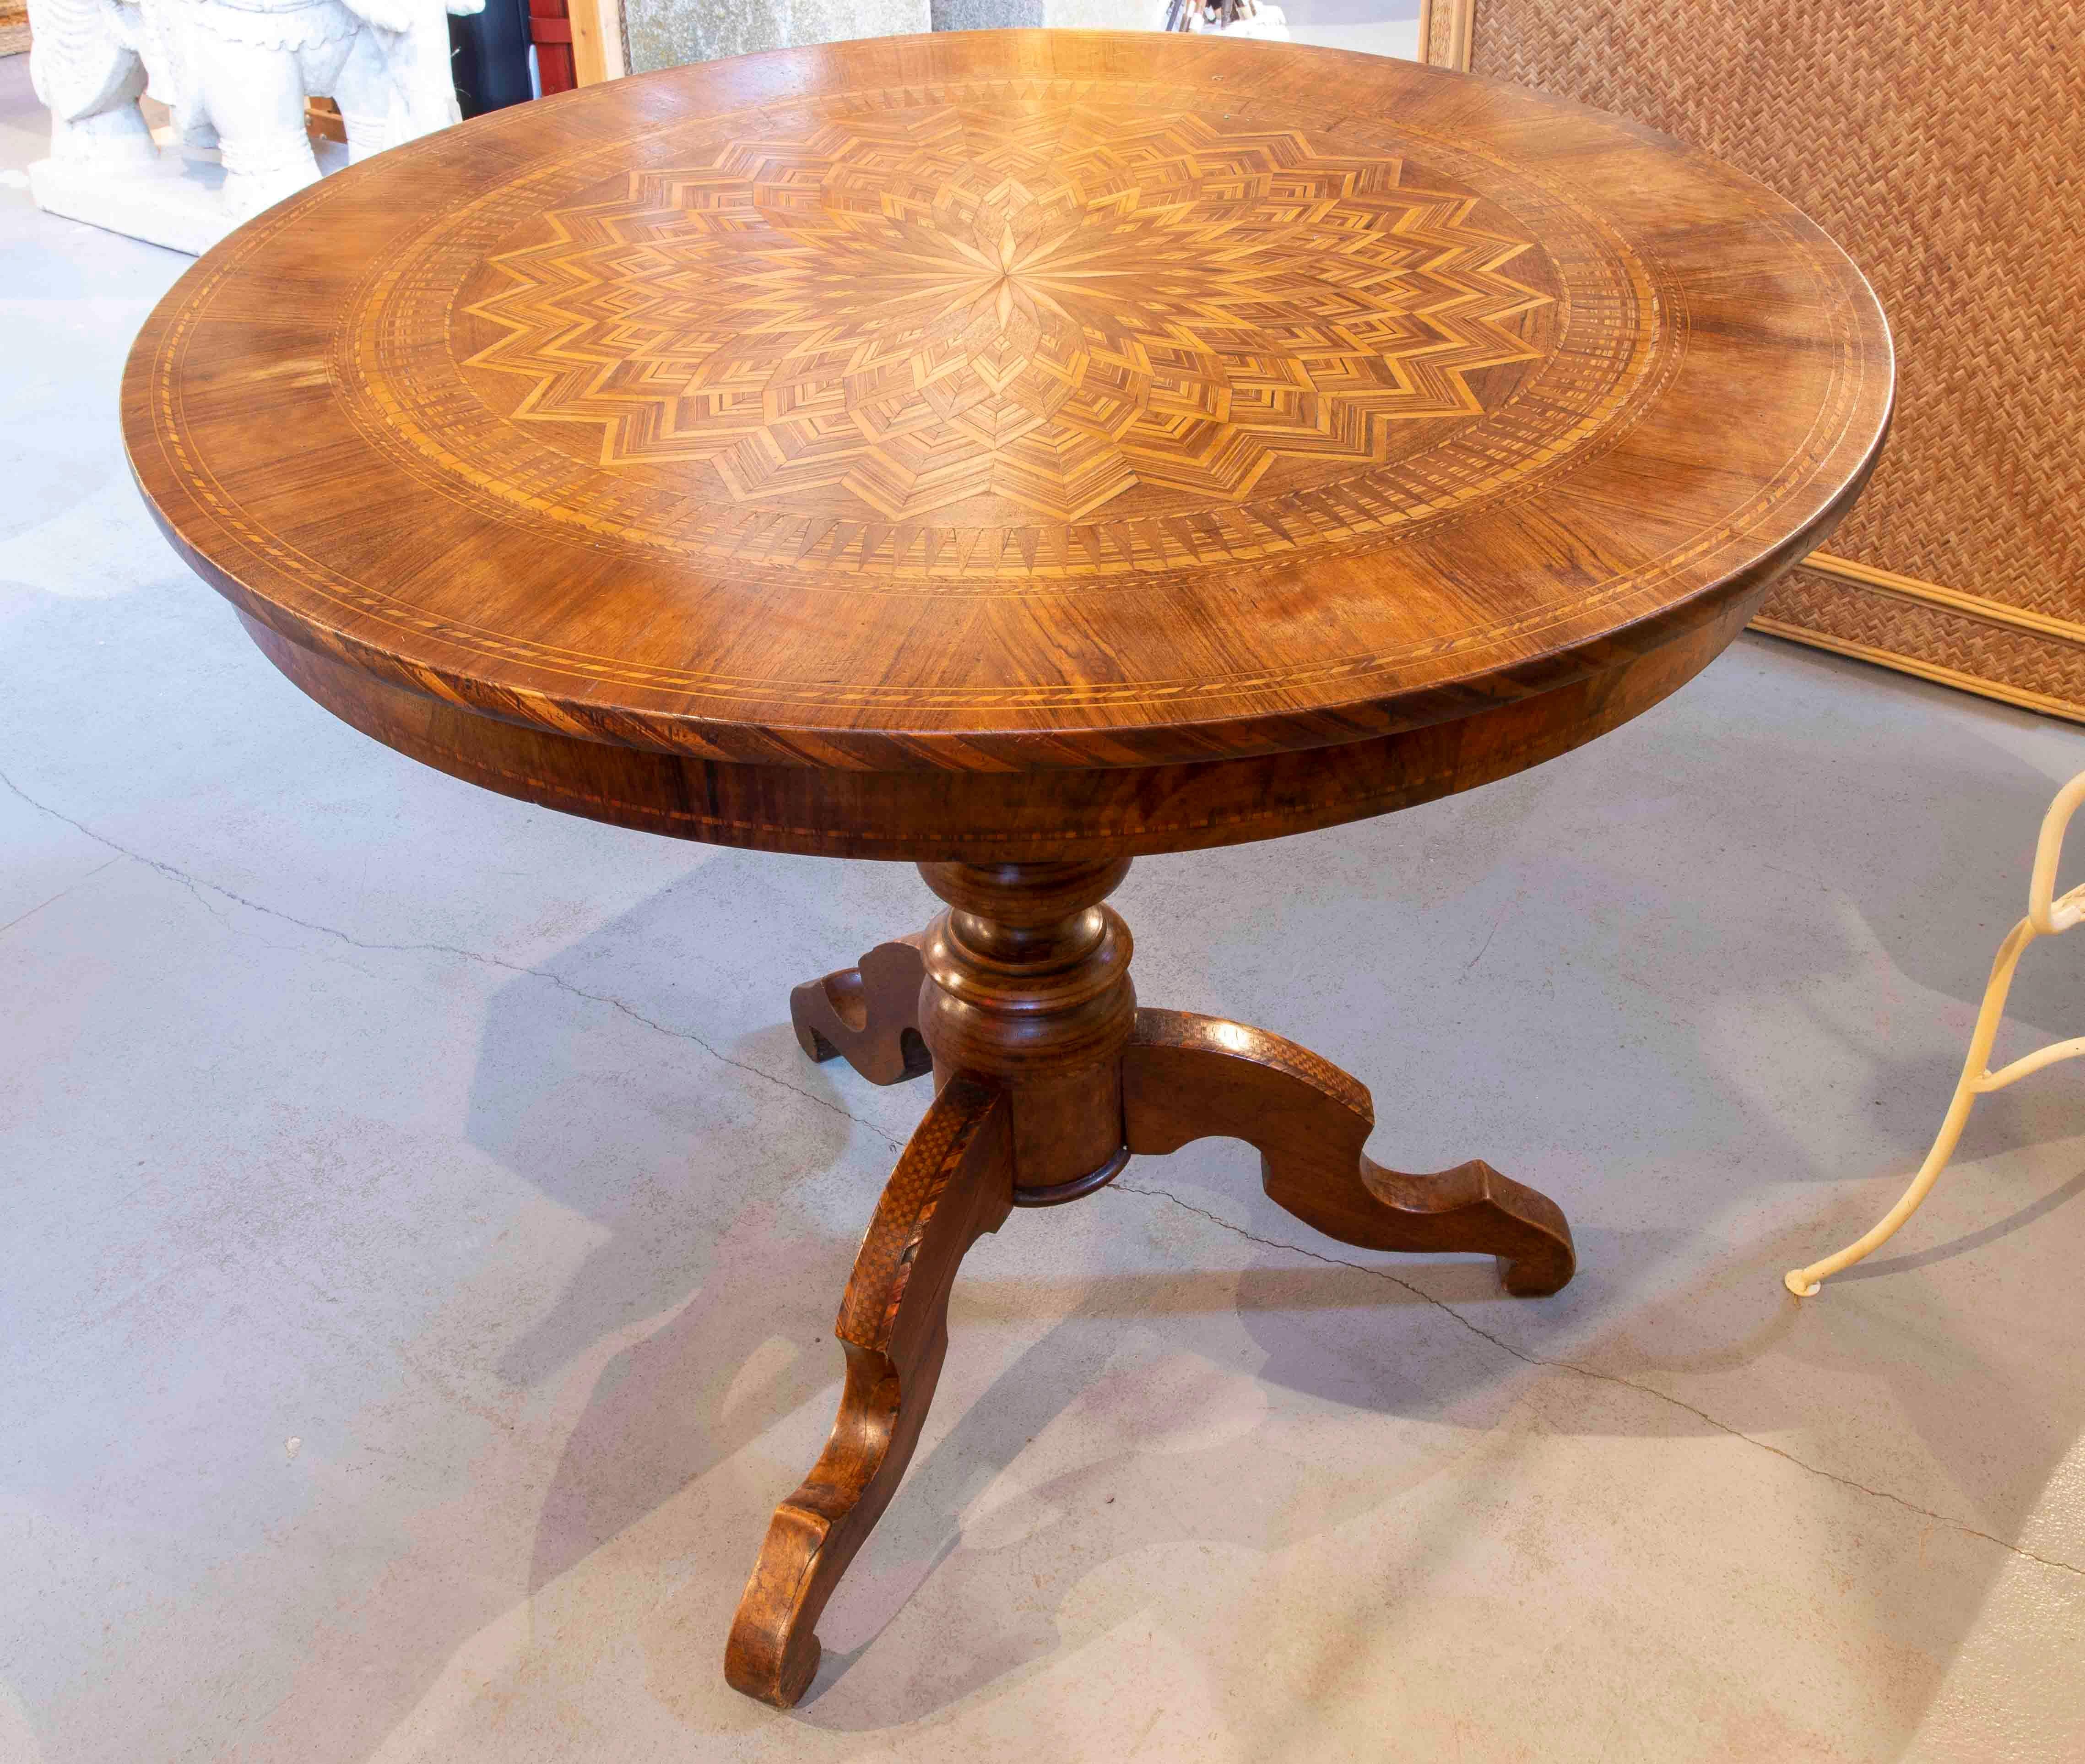 19th Century Round Wooden Table with Inlaid Table Top and Legs For Sale 1